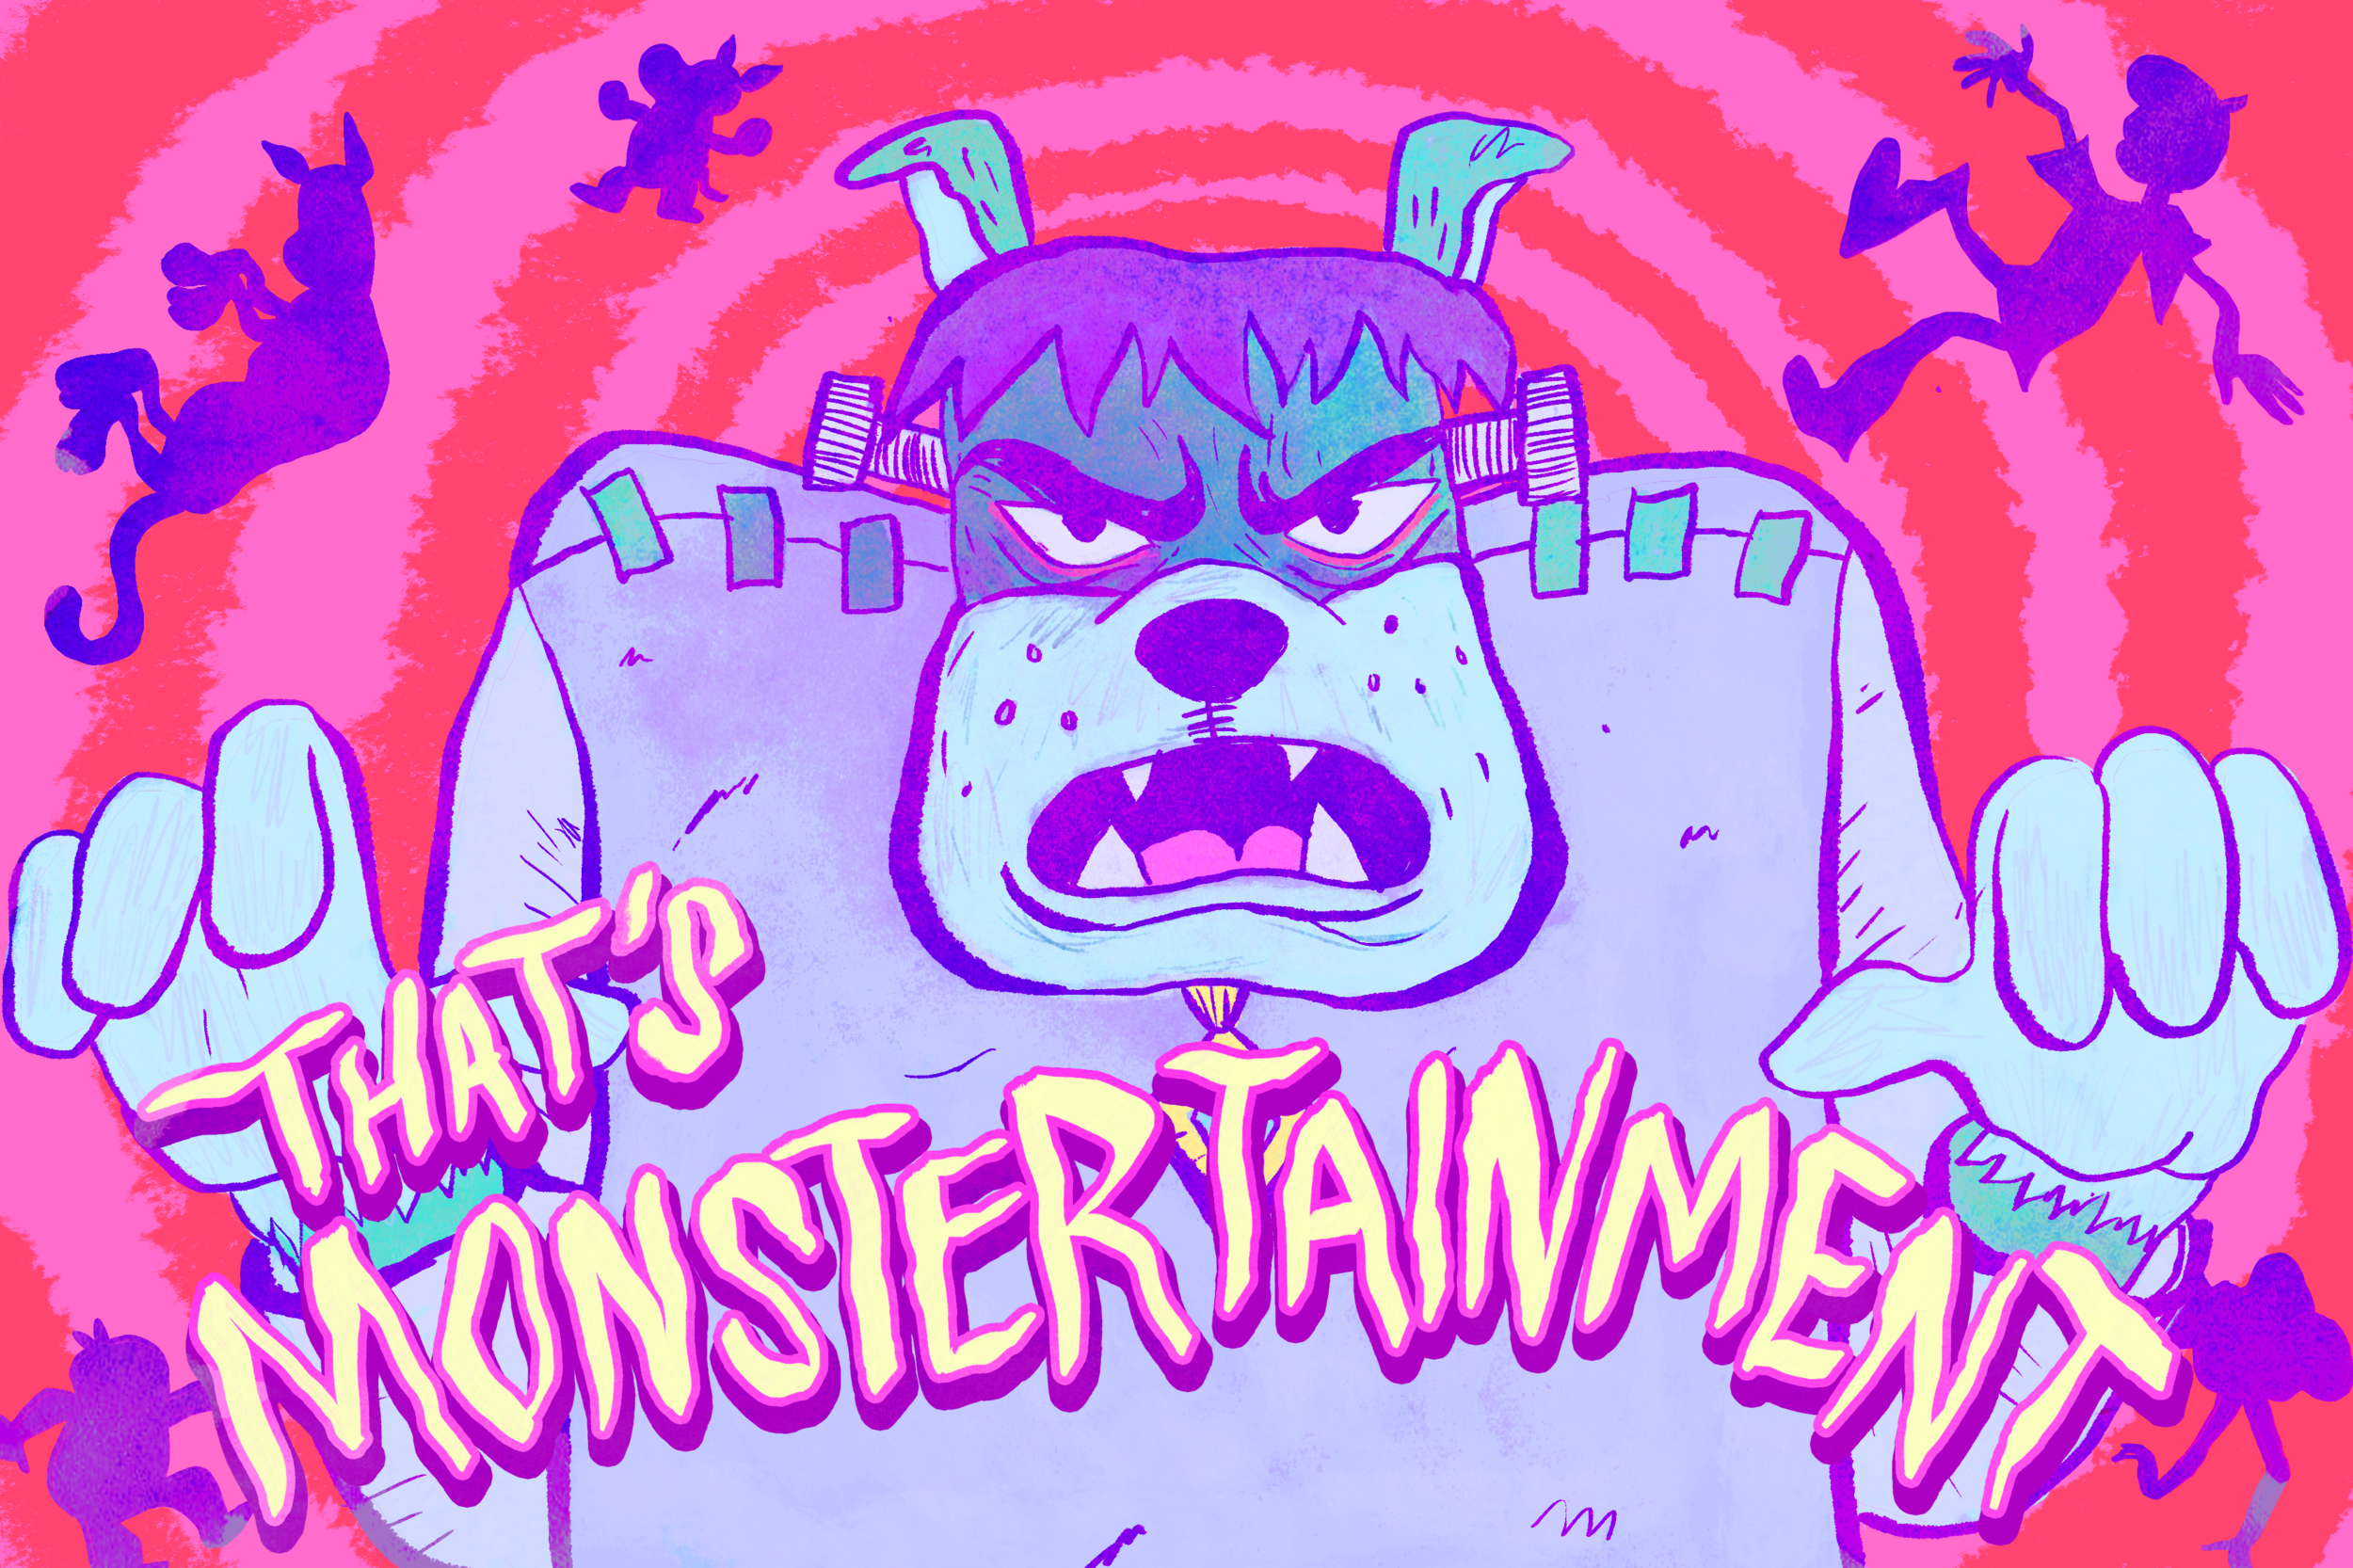   Scooby Dudes  - Episode 58: "That's Monstertainment" - Title Card by Ulibeanz 